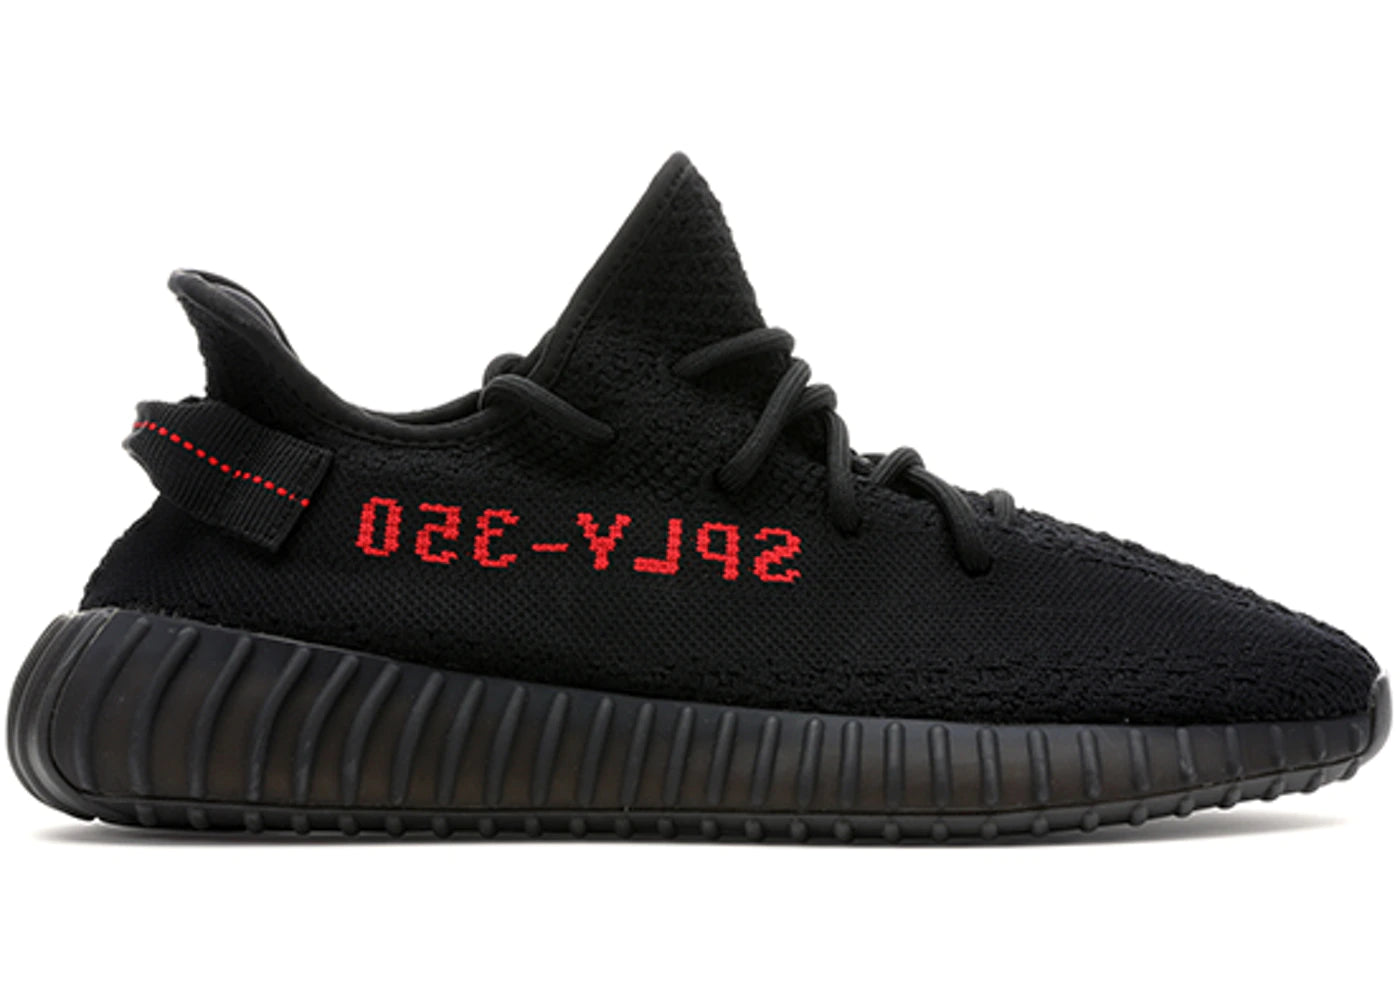 Adidas Yeezy Boost 350 V2 Black Red (2017/2020) - Used